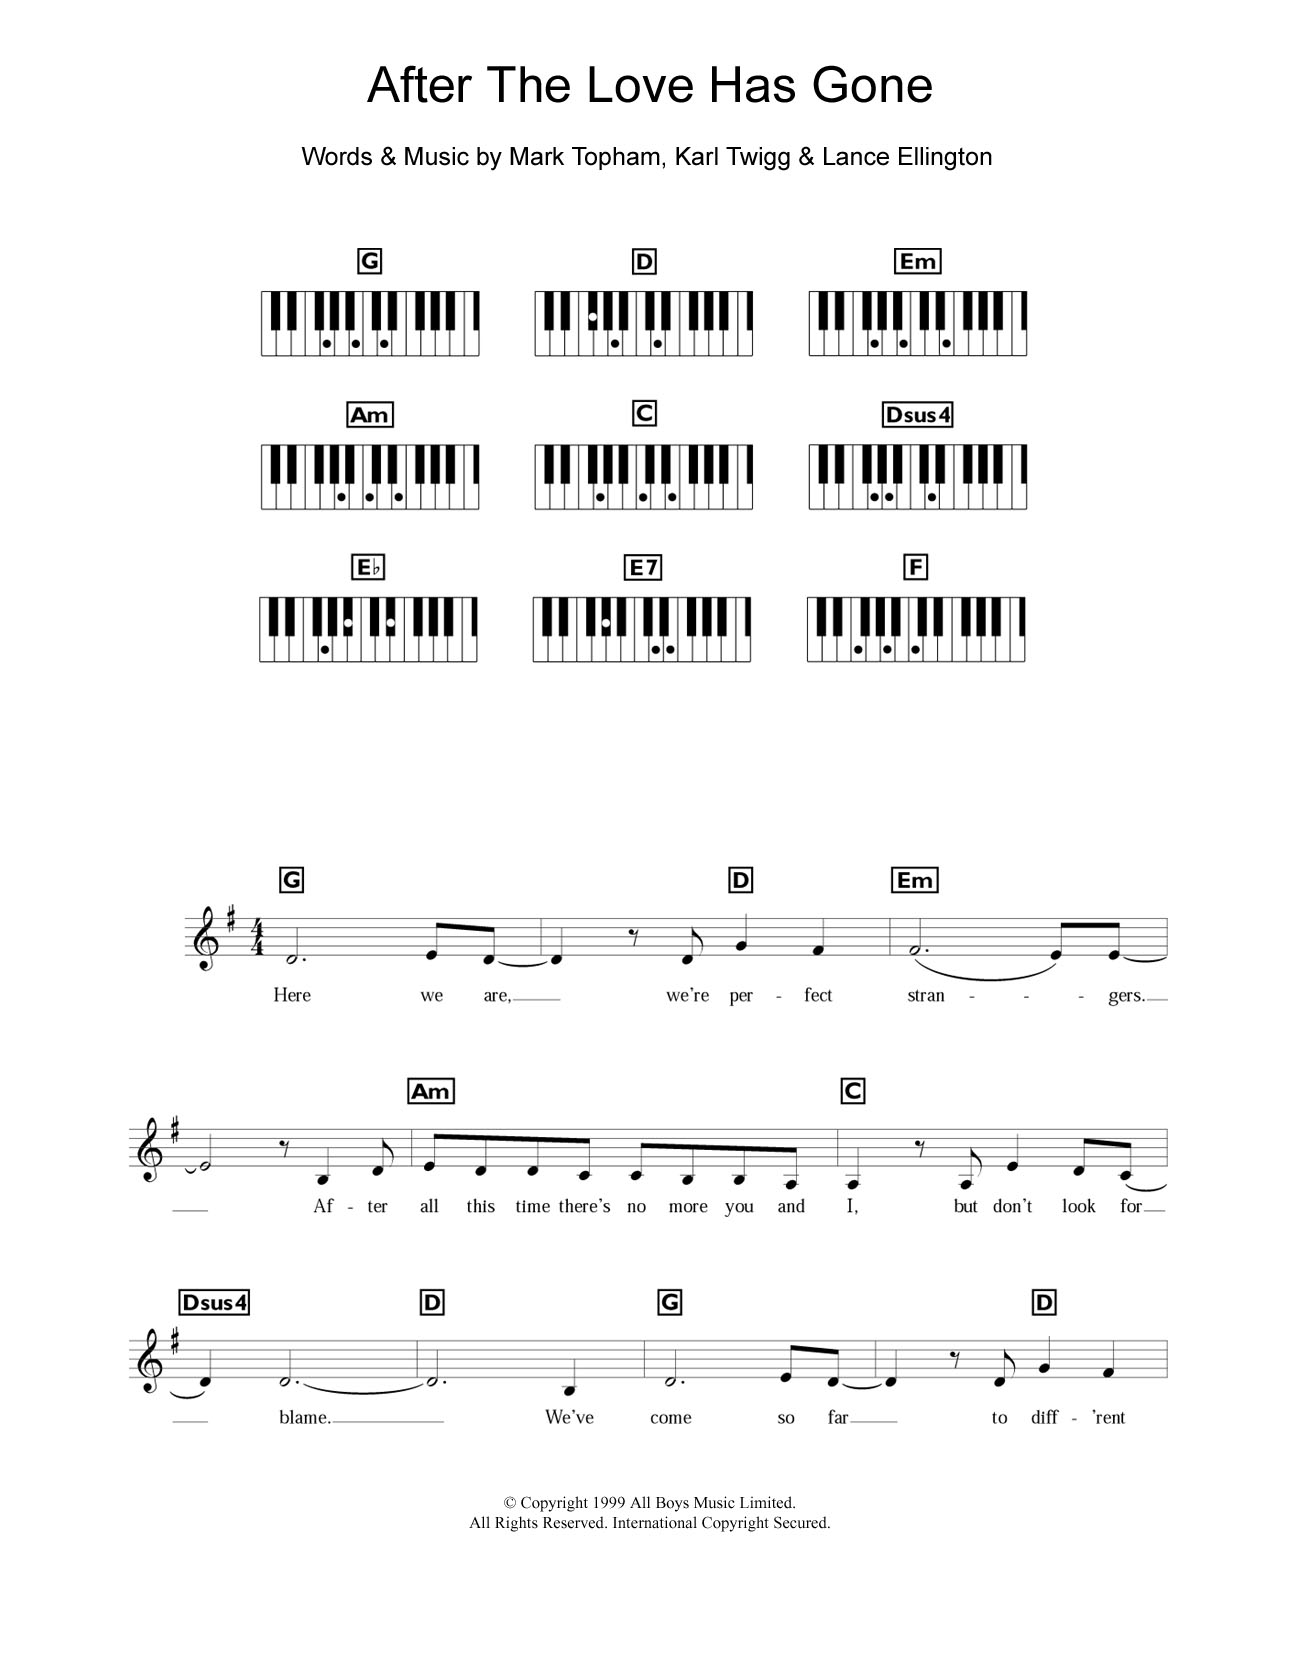 Download Steps After The Love Has Gone Sheet Music